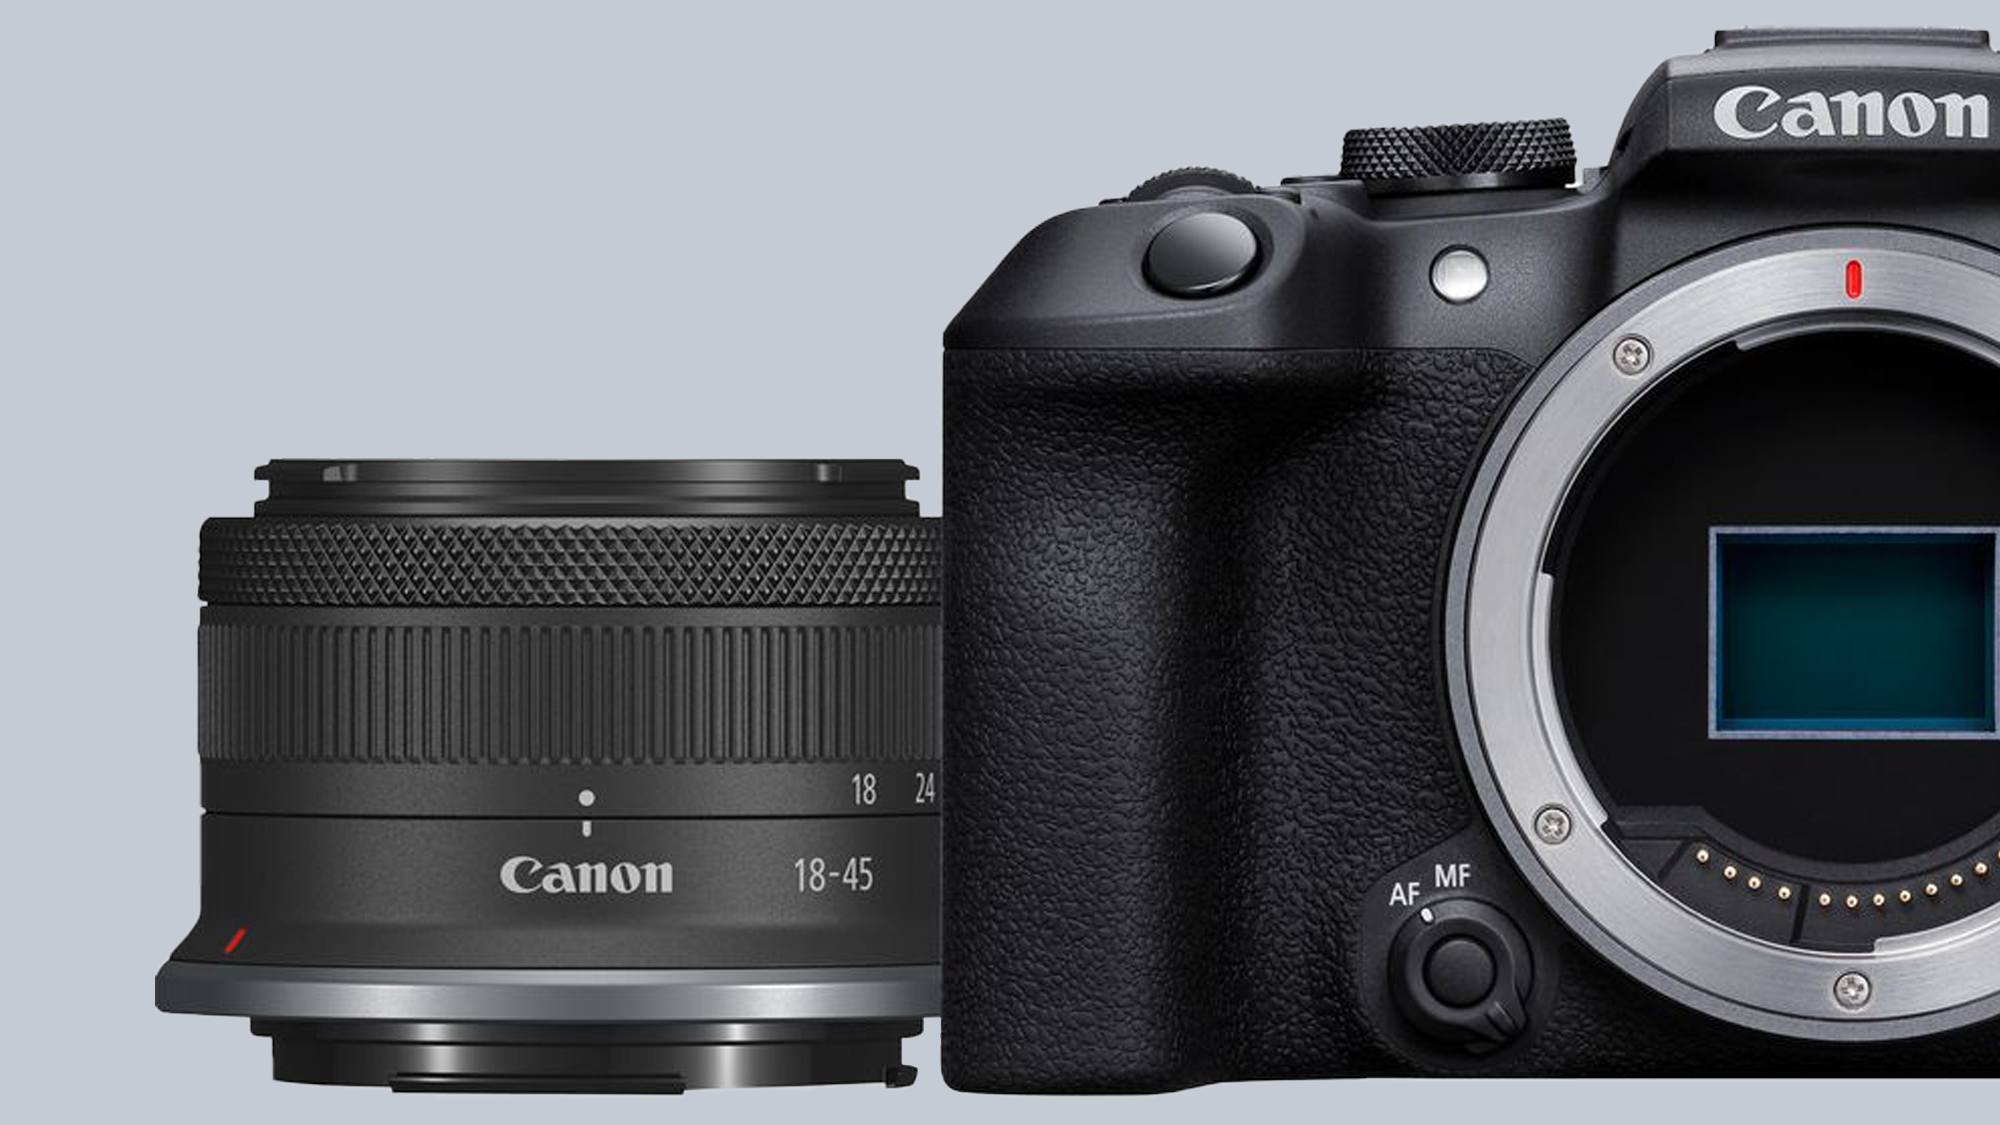 The lens standing next to the Canon EOS R10 camera